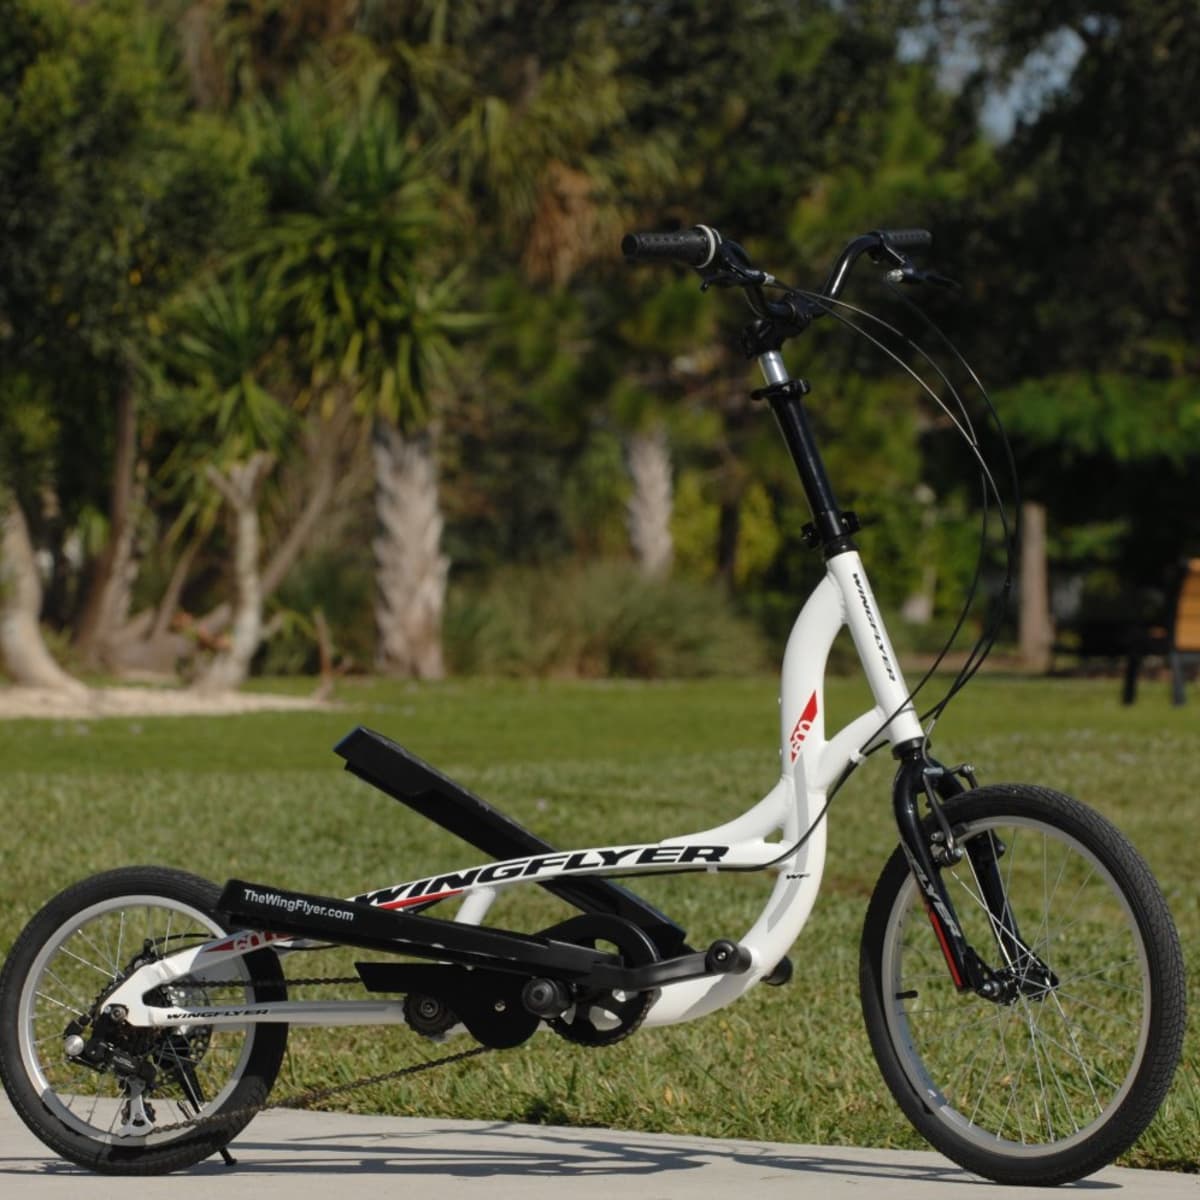 Four Great Scooter Bikes | Reviews & Suggestions - HubPages